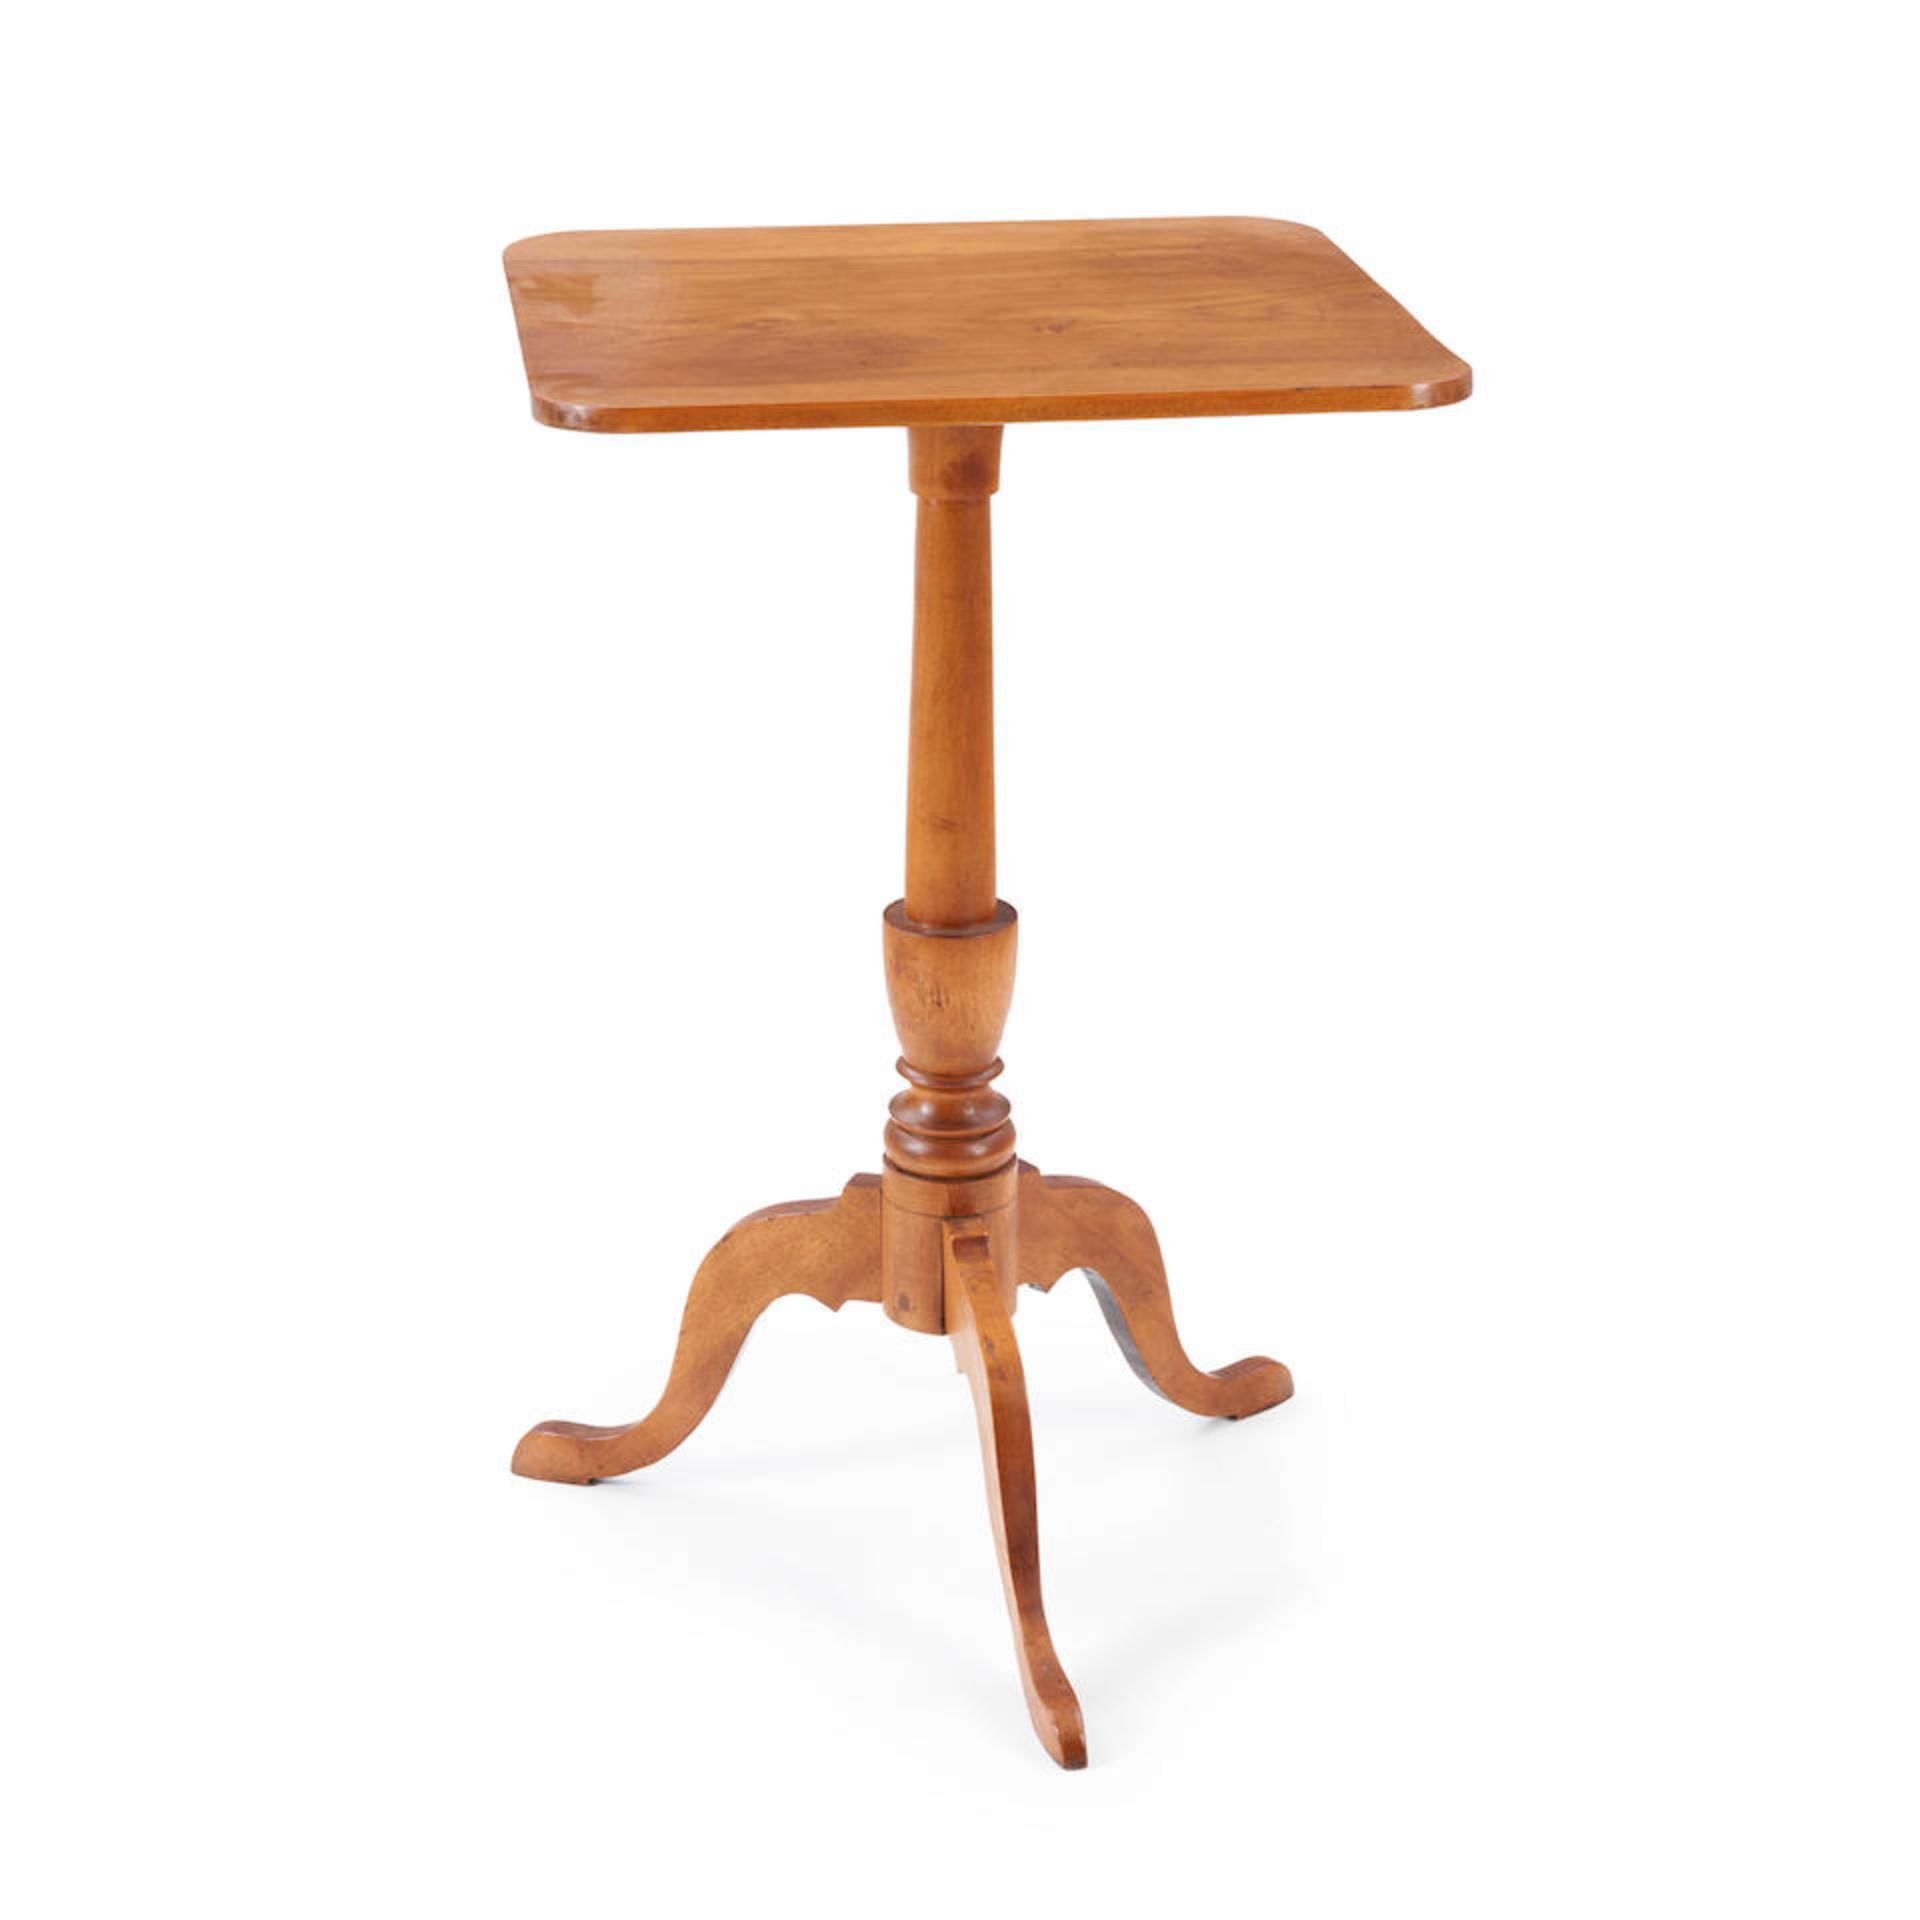 FEDERAL-STYLE MAPLE CANDLESTAND